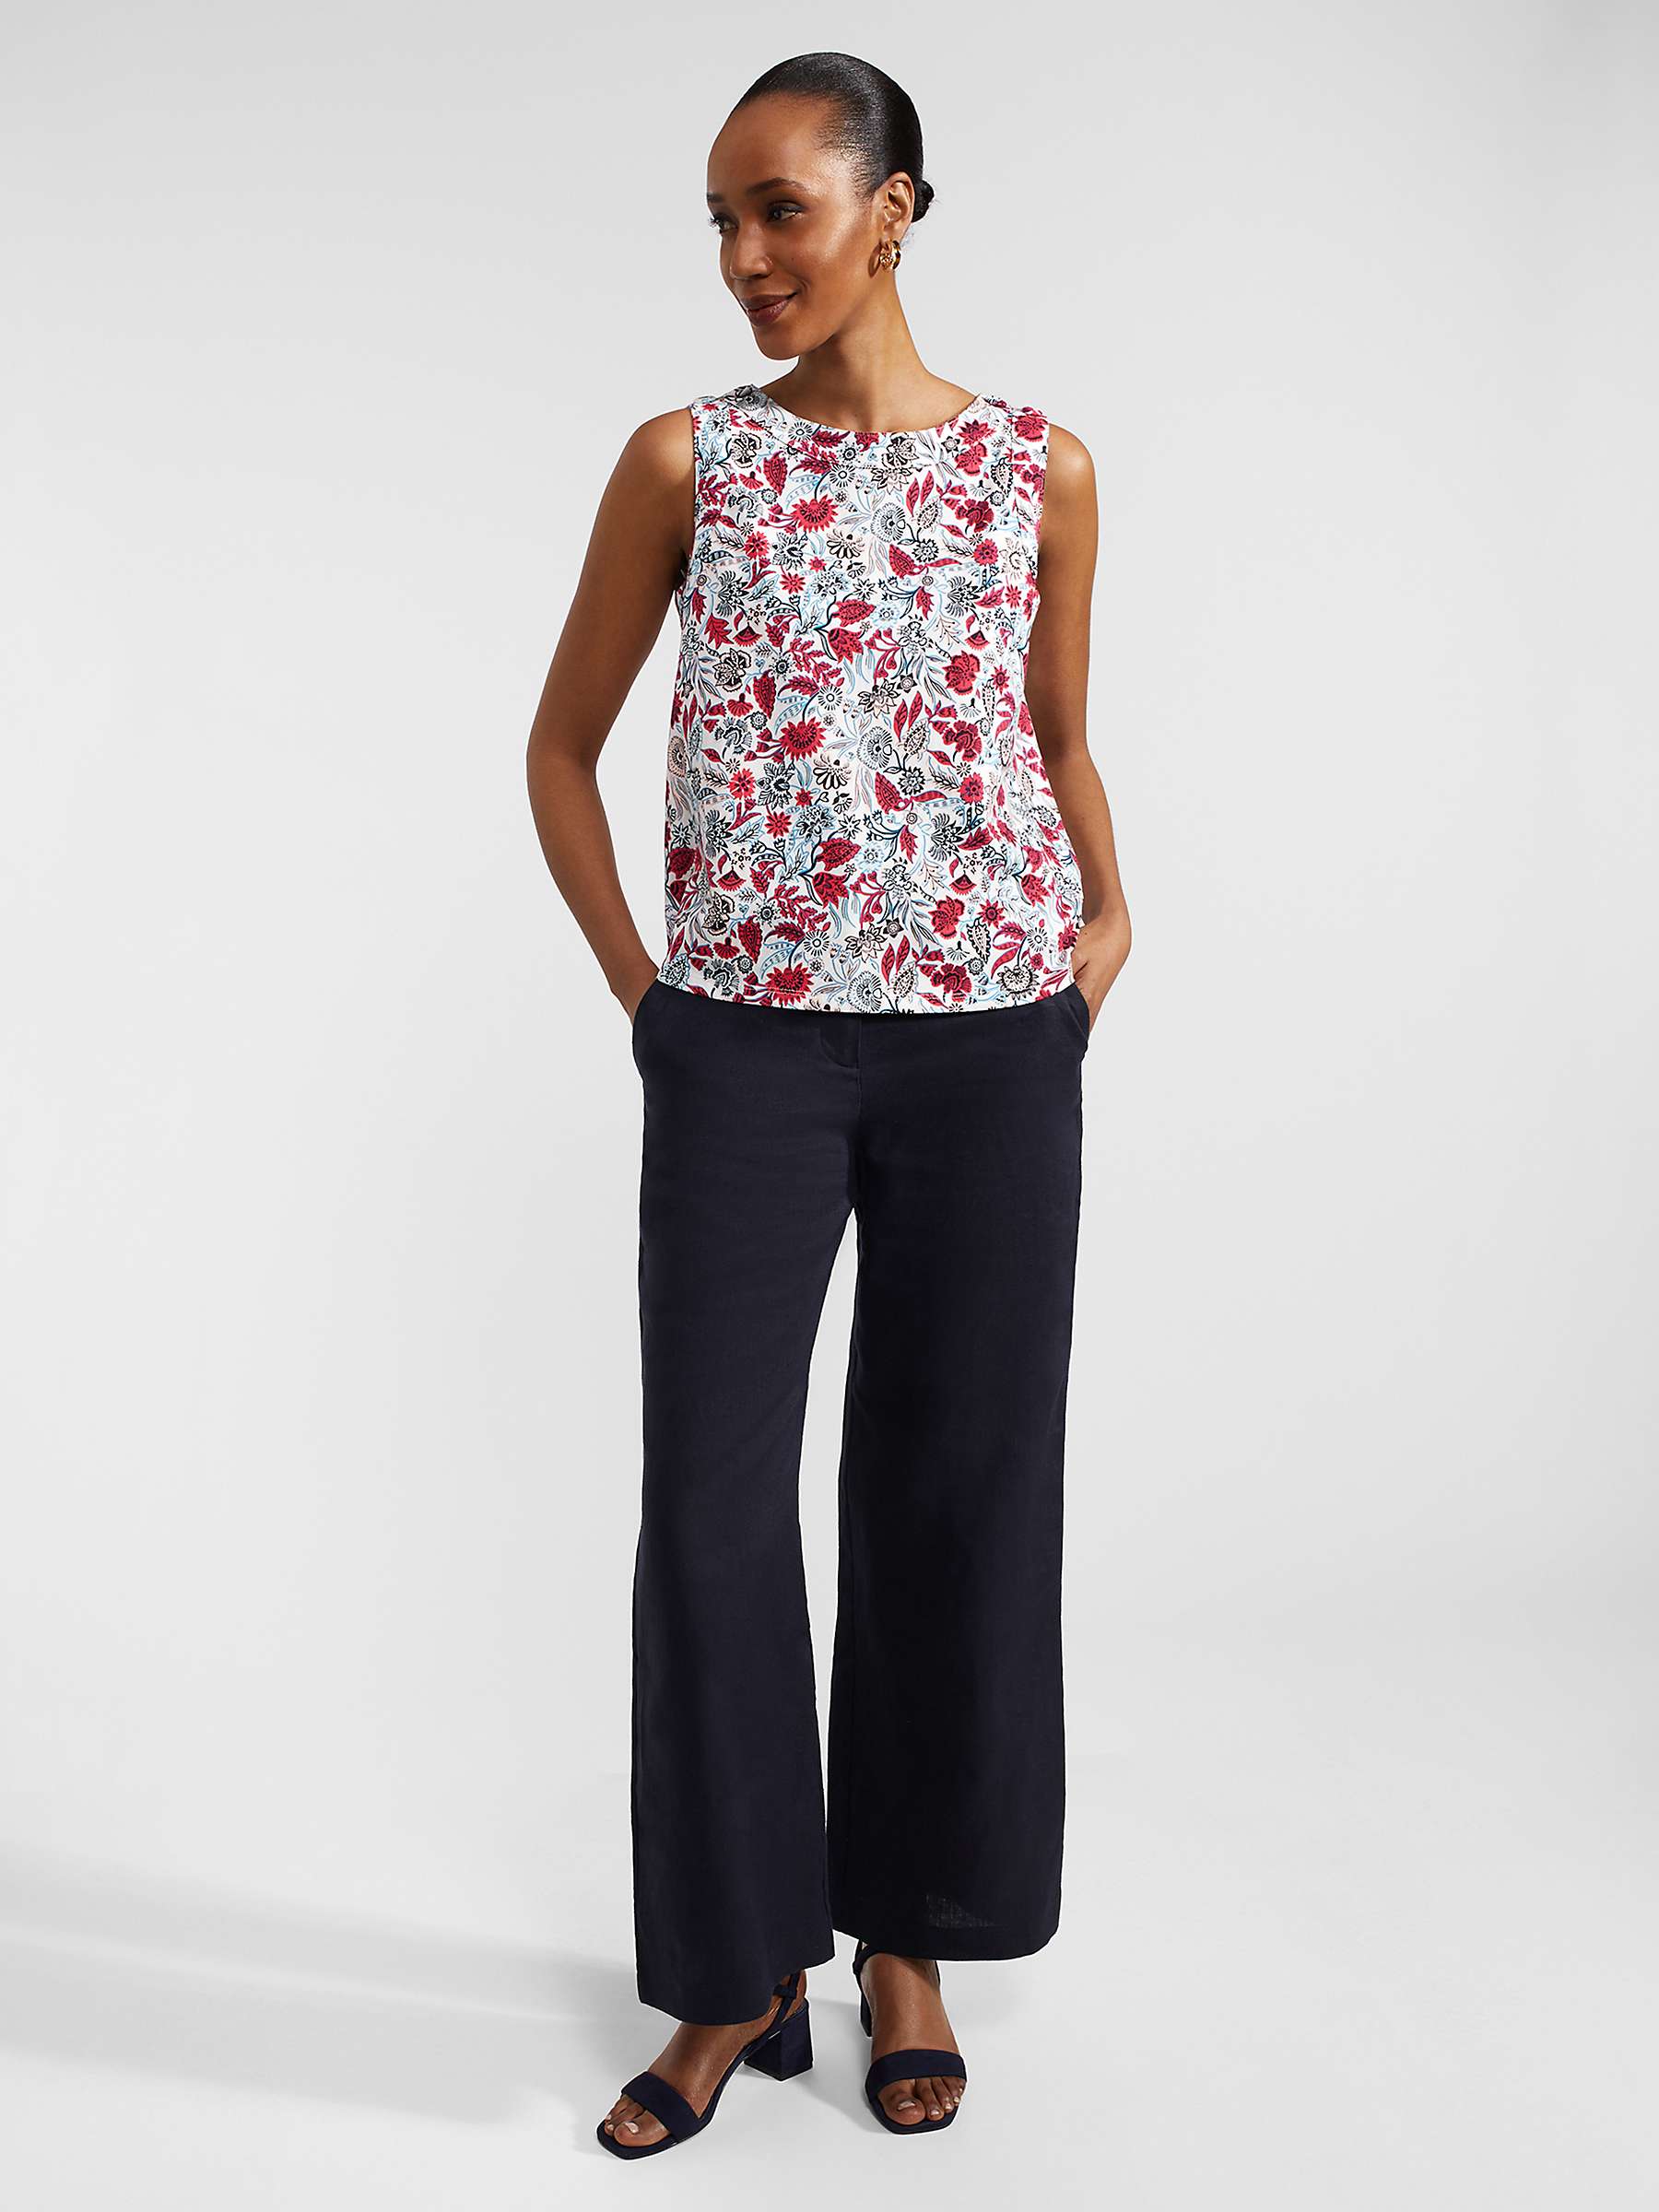 Buy Hobbs Maddy Floral Print Sleeveless Top, White/Multi Online at johnlewis.com